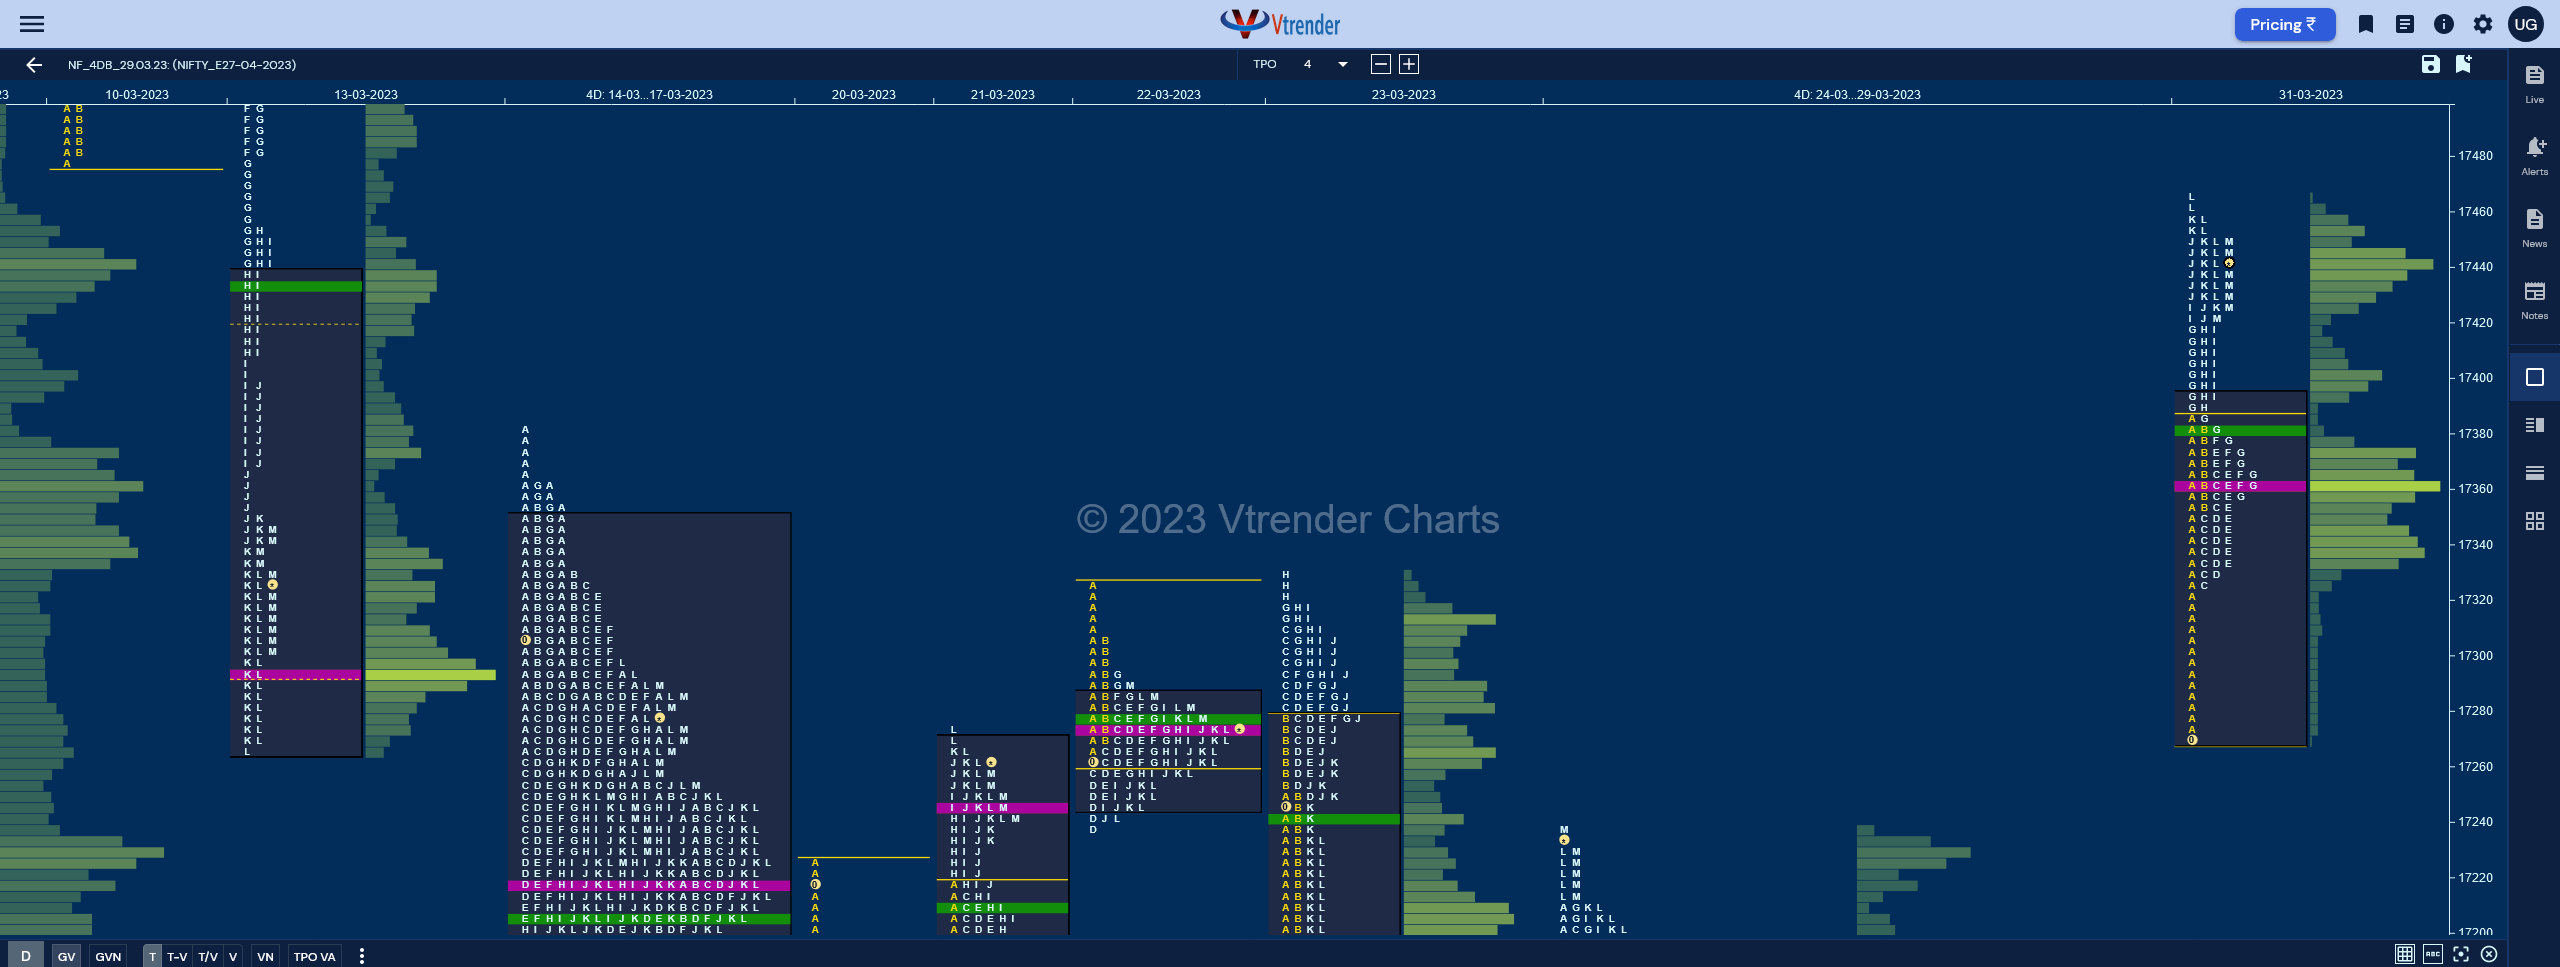 Nf 1 Market Profile Analysis Dated 03Rd Apr 2023 Banknifty Futures, Charts, Day Trading, Intraday Trading, Intraday Trading Strategies, Market Profile, Market Profile Trading Strategies, Nifty Futures, Order Flow Analysis, Support And Resistance, Technical Analysis, Trading Strategies, Volume Profile Trading